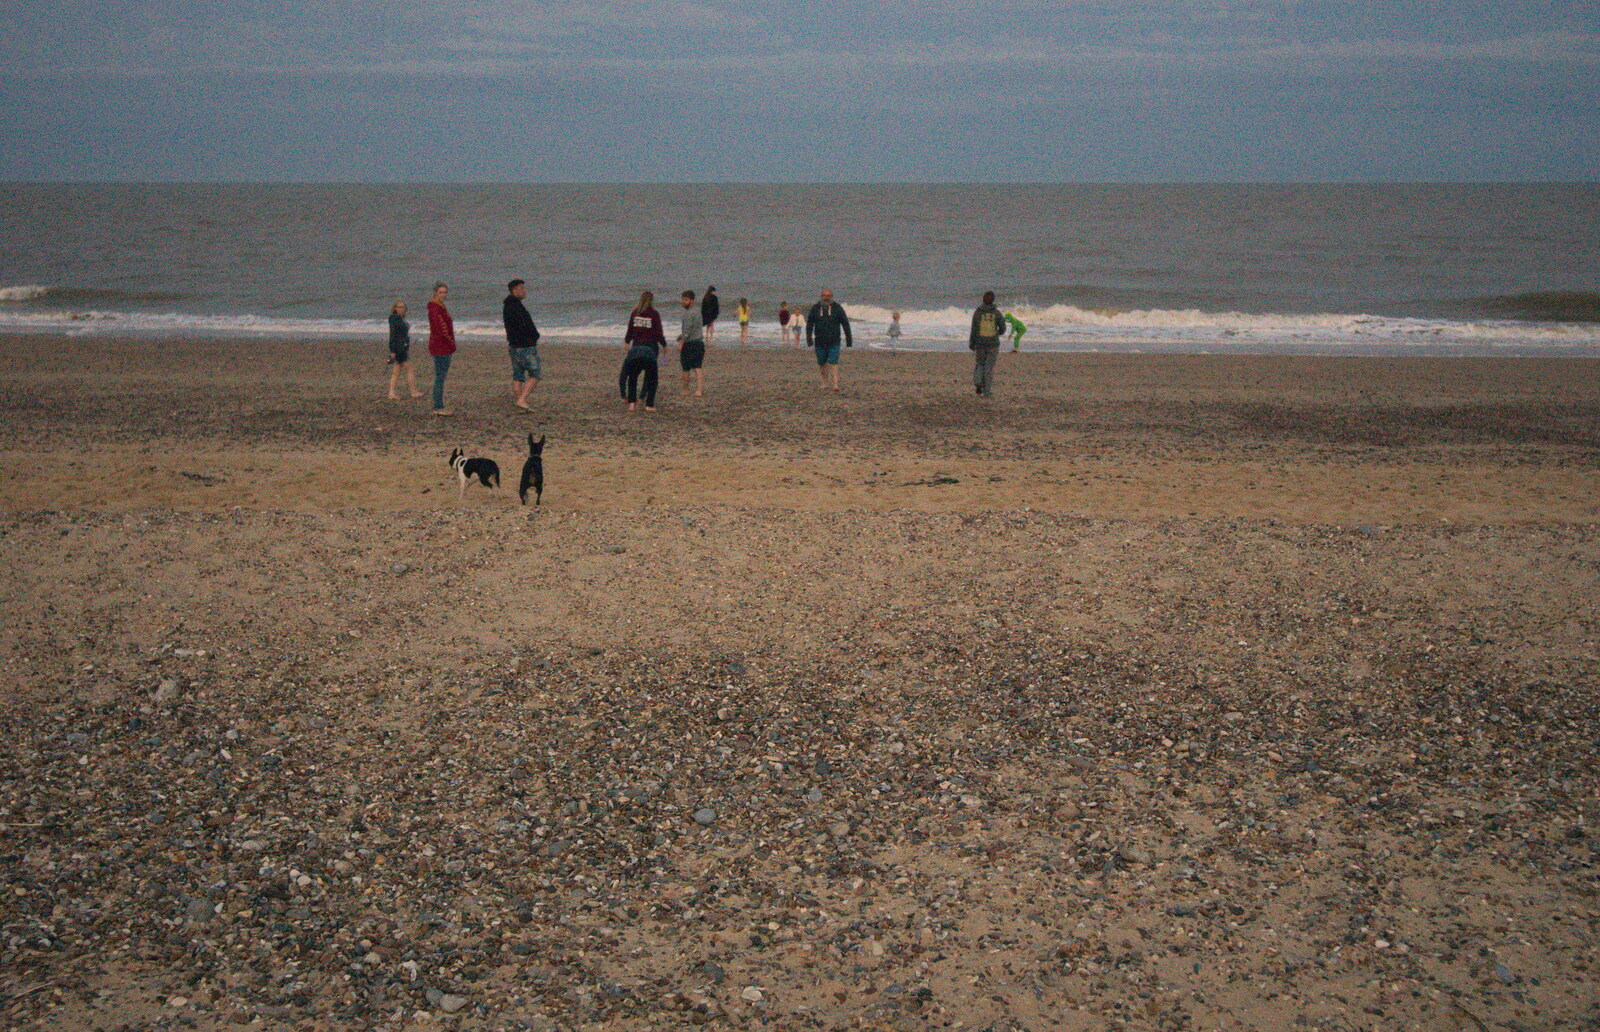 Isobel and a gang of people on the beach from The Danger of Trees: A Camping (Mis)adventure - Southwold, Suffolk - 3rd August 2015